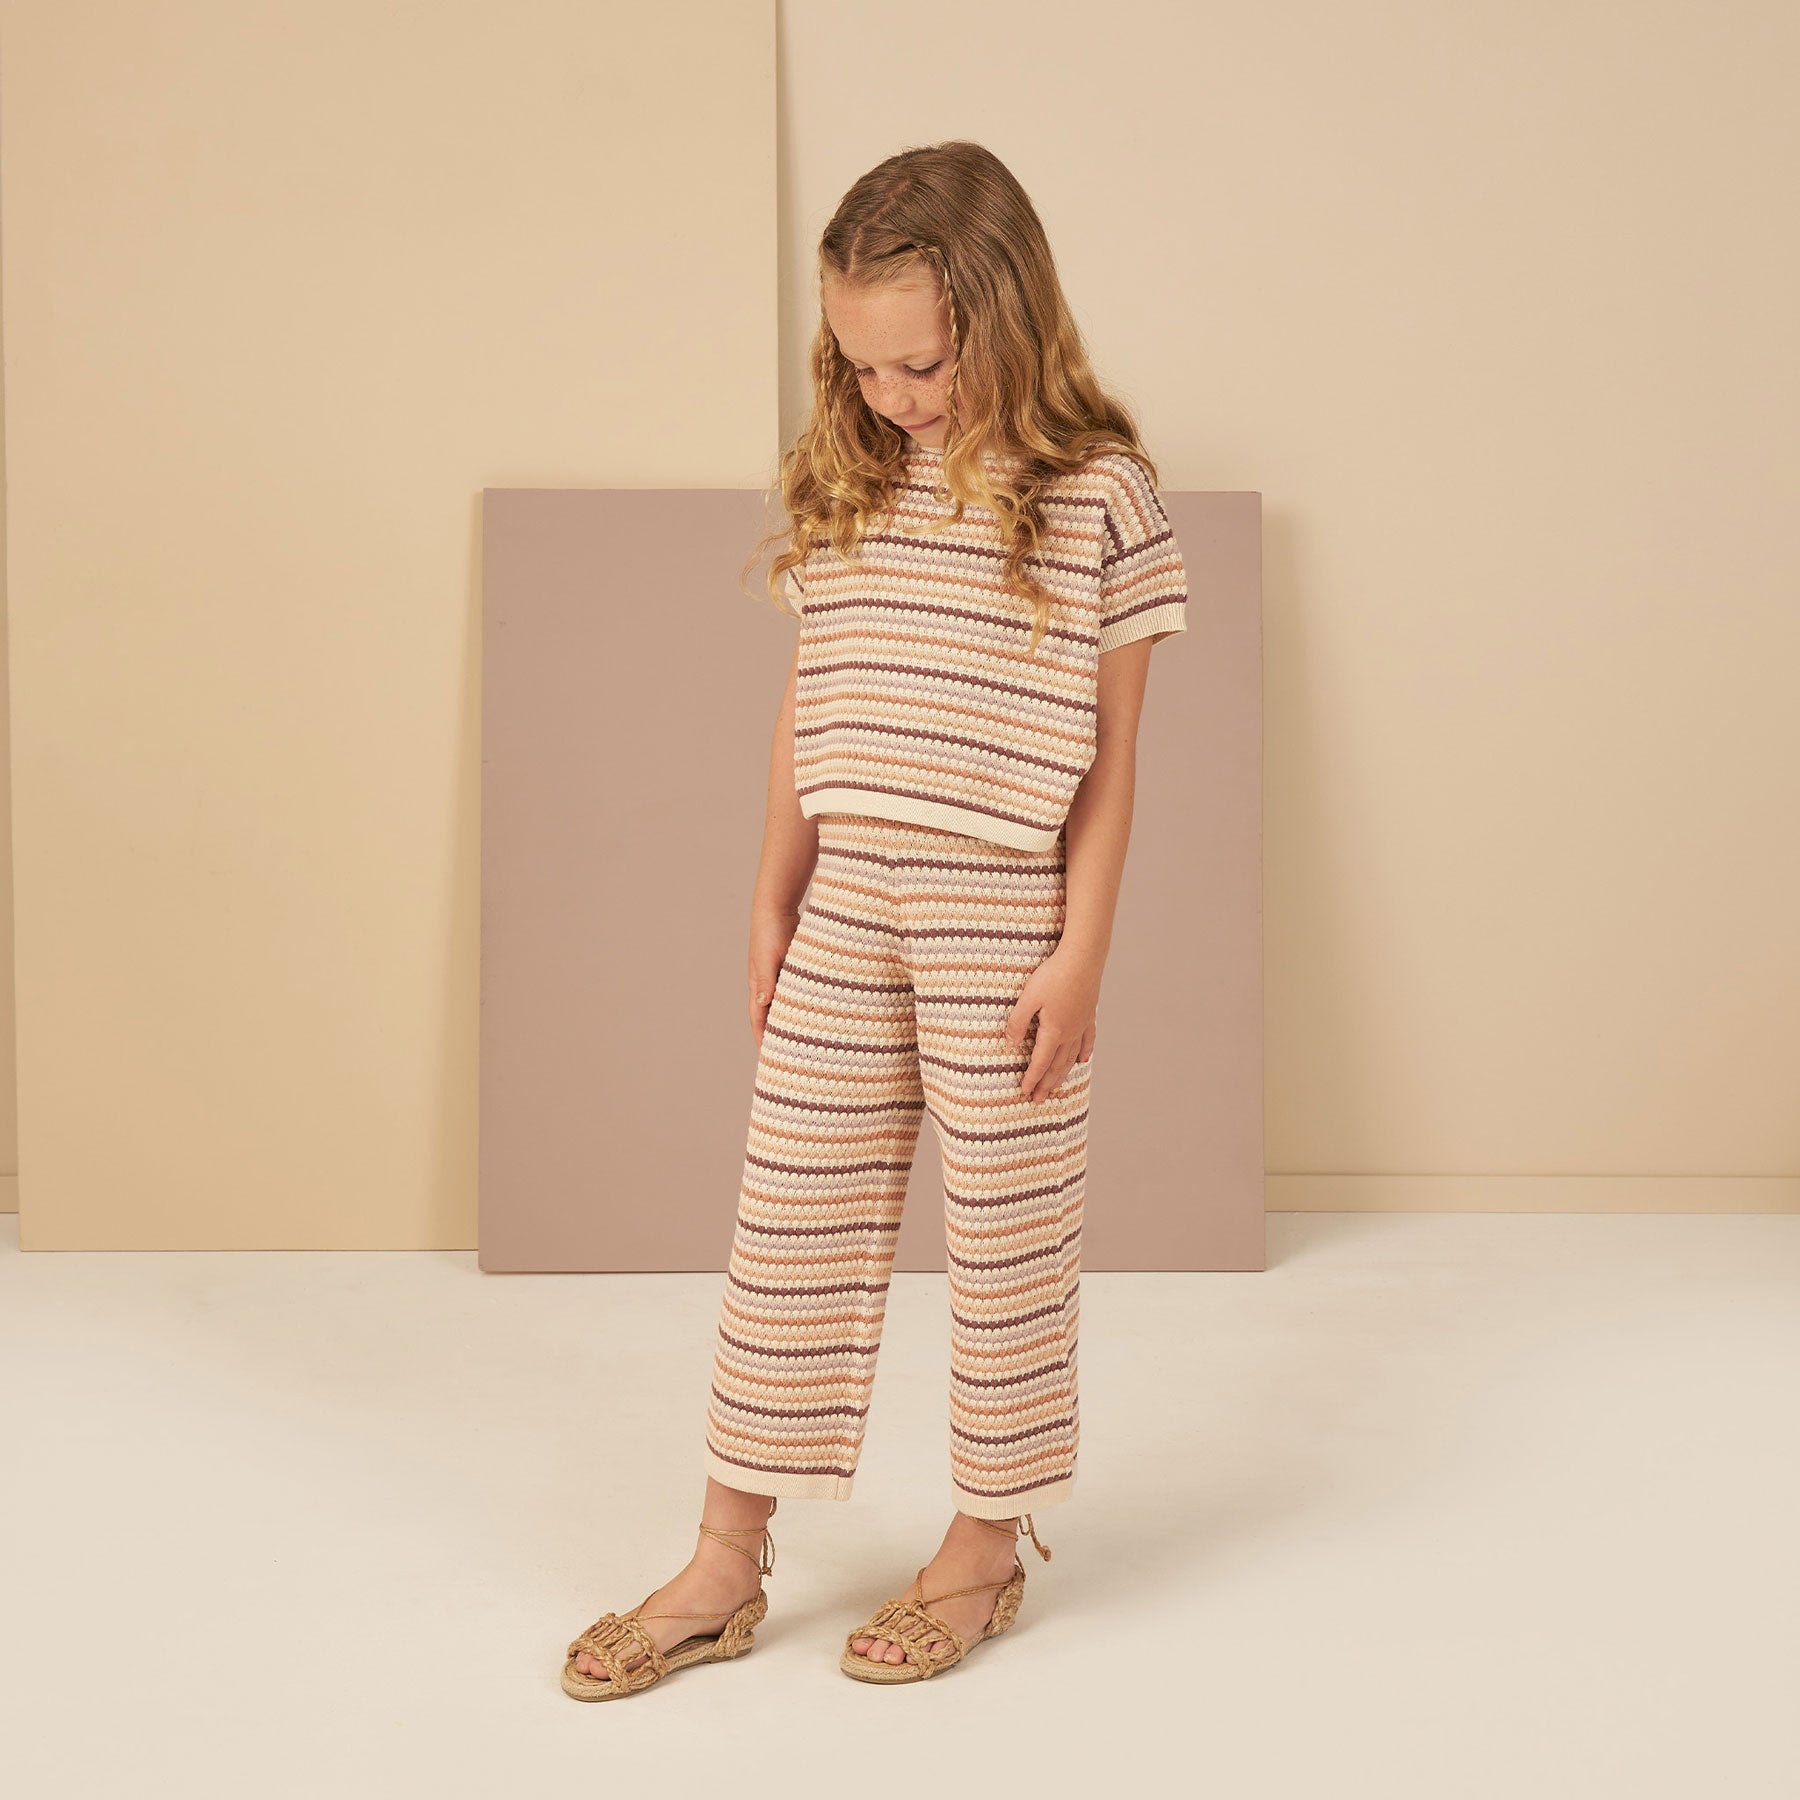 Rylee and Cru Knit Wide Leg Pant - Honeycomb Stripe - Mulberry / Mauve / Clay / Sand